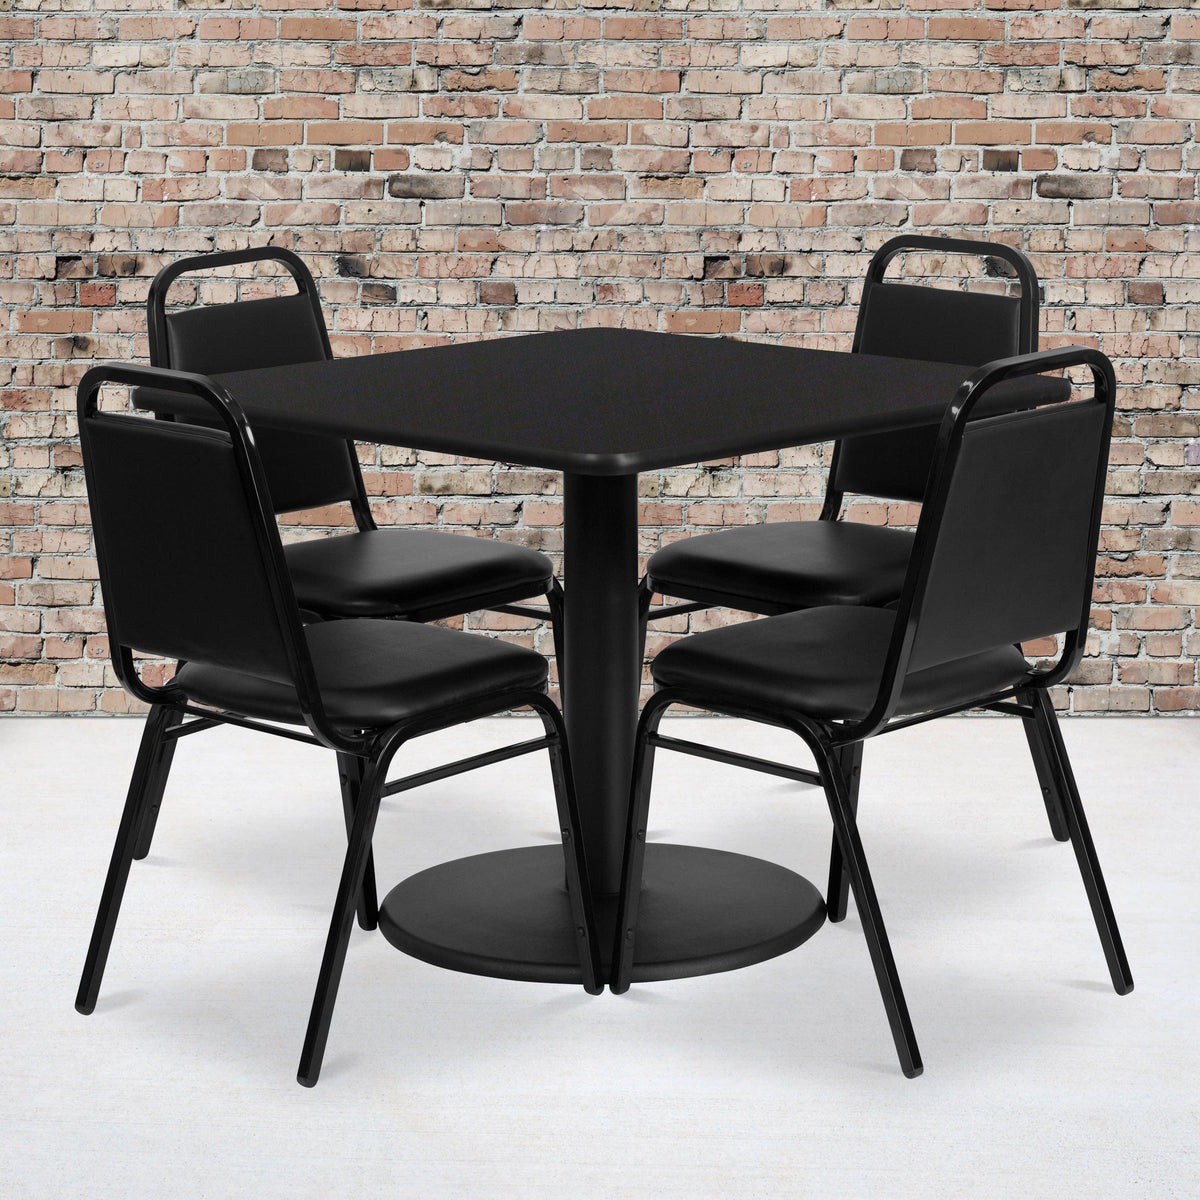 Black Top/Black Vinyl Seat |#| 36inch Square Black Laminate Table with Round Base and 4 Black Banquet Chairs